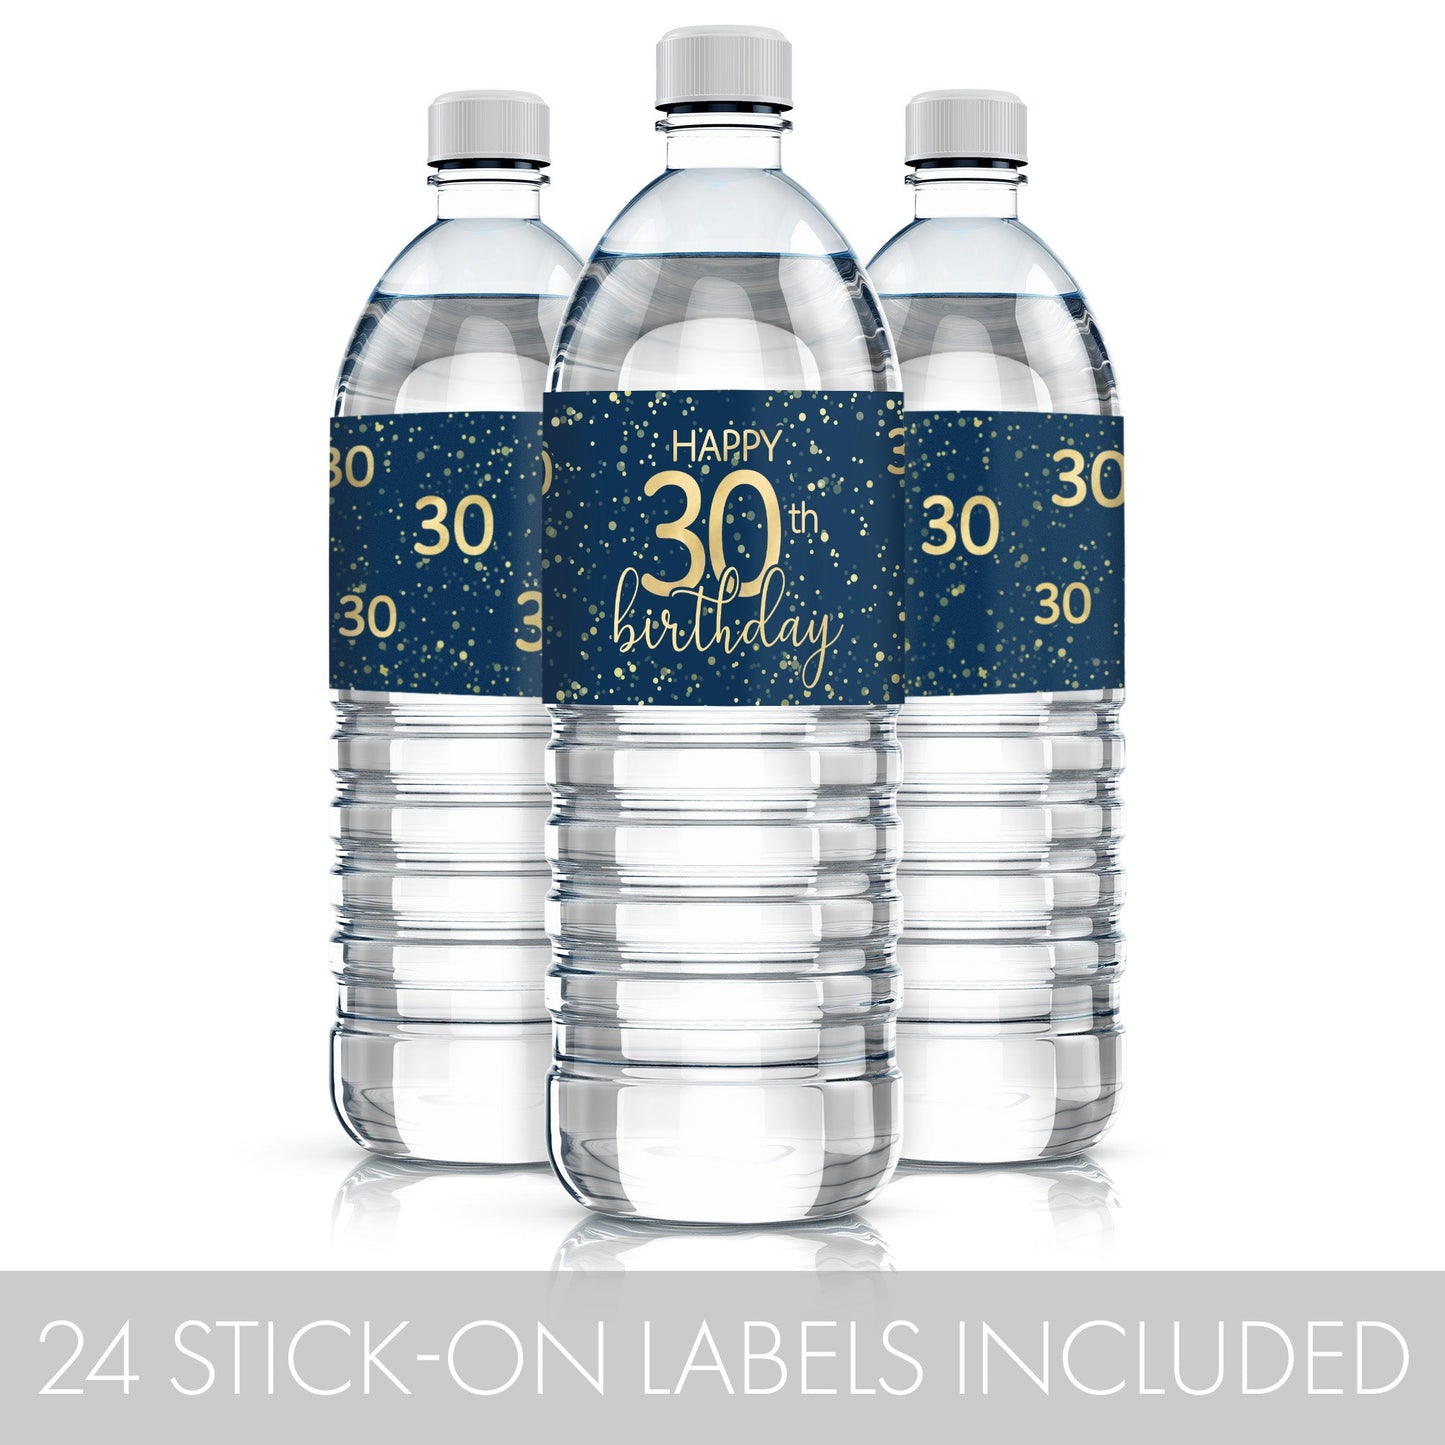 A group of water bottles with elegant navy blue and gold labels that are customized for an 30th birthday celebration, perfect for adding a personalized touch to any party